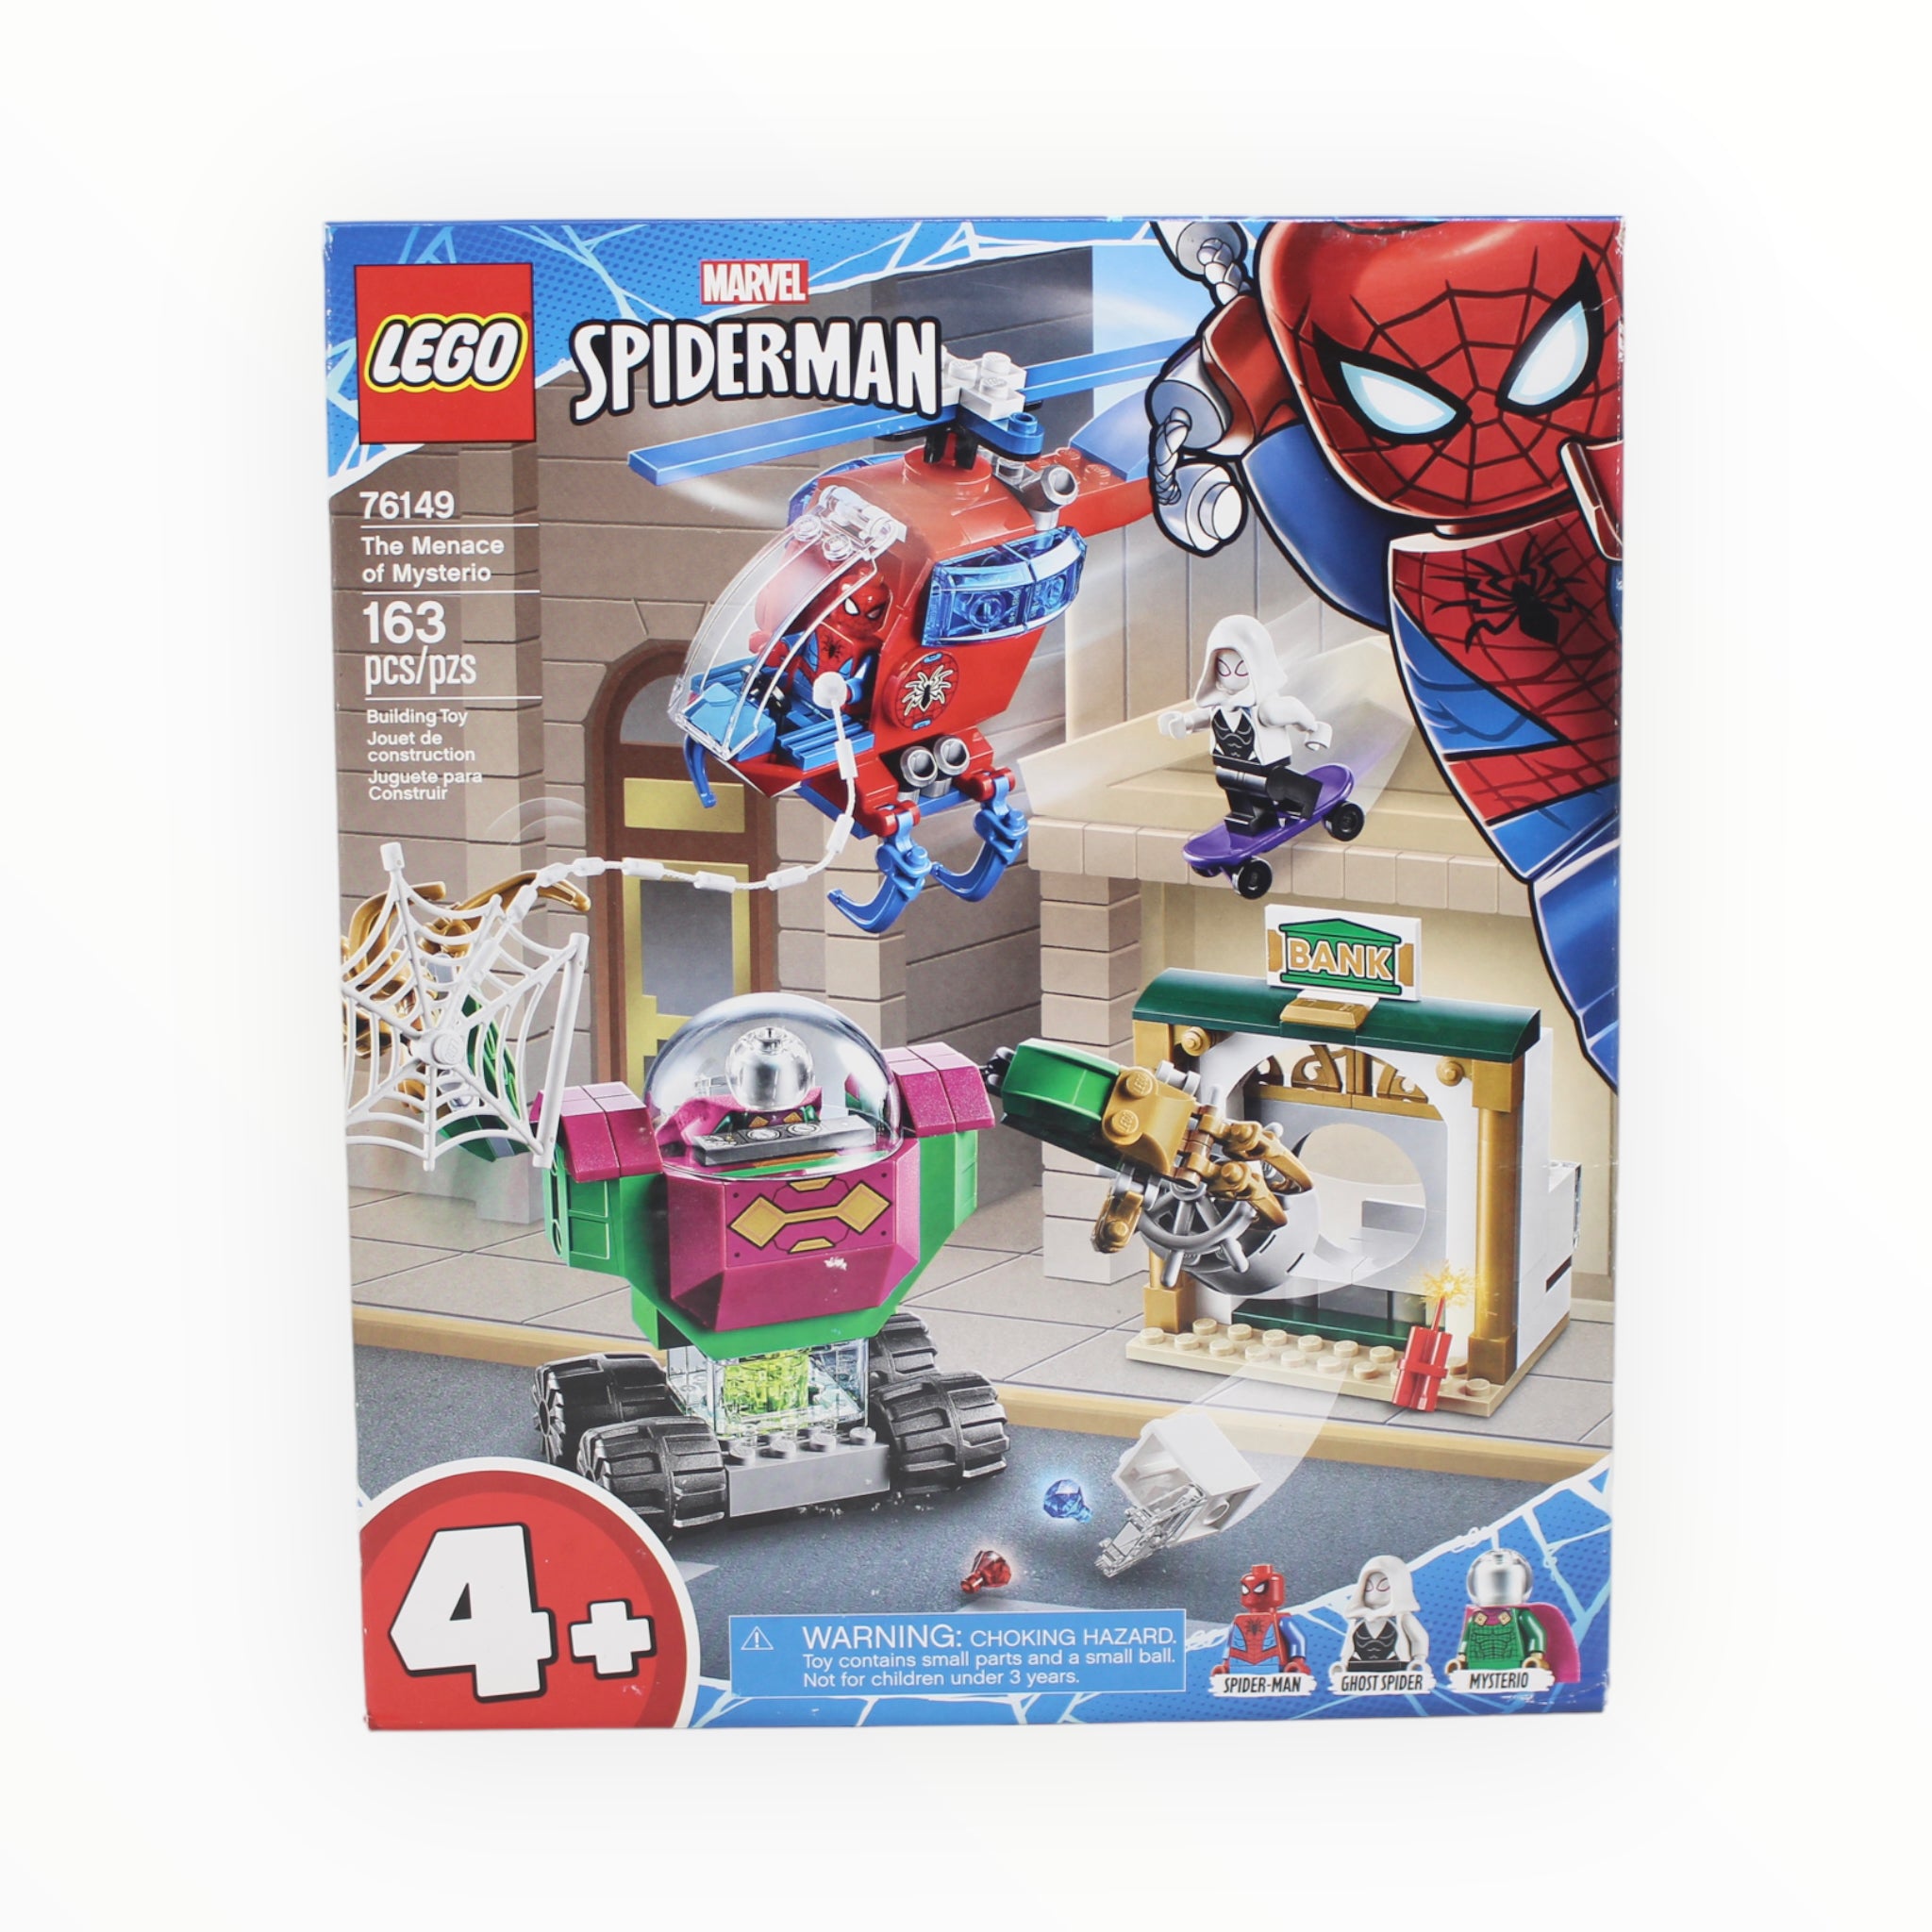 Retired Set 76149 Spider-Man The Menace of Mysterio